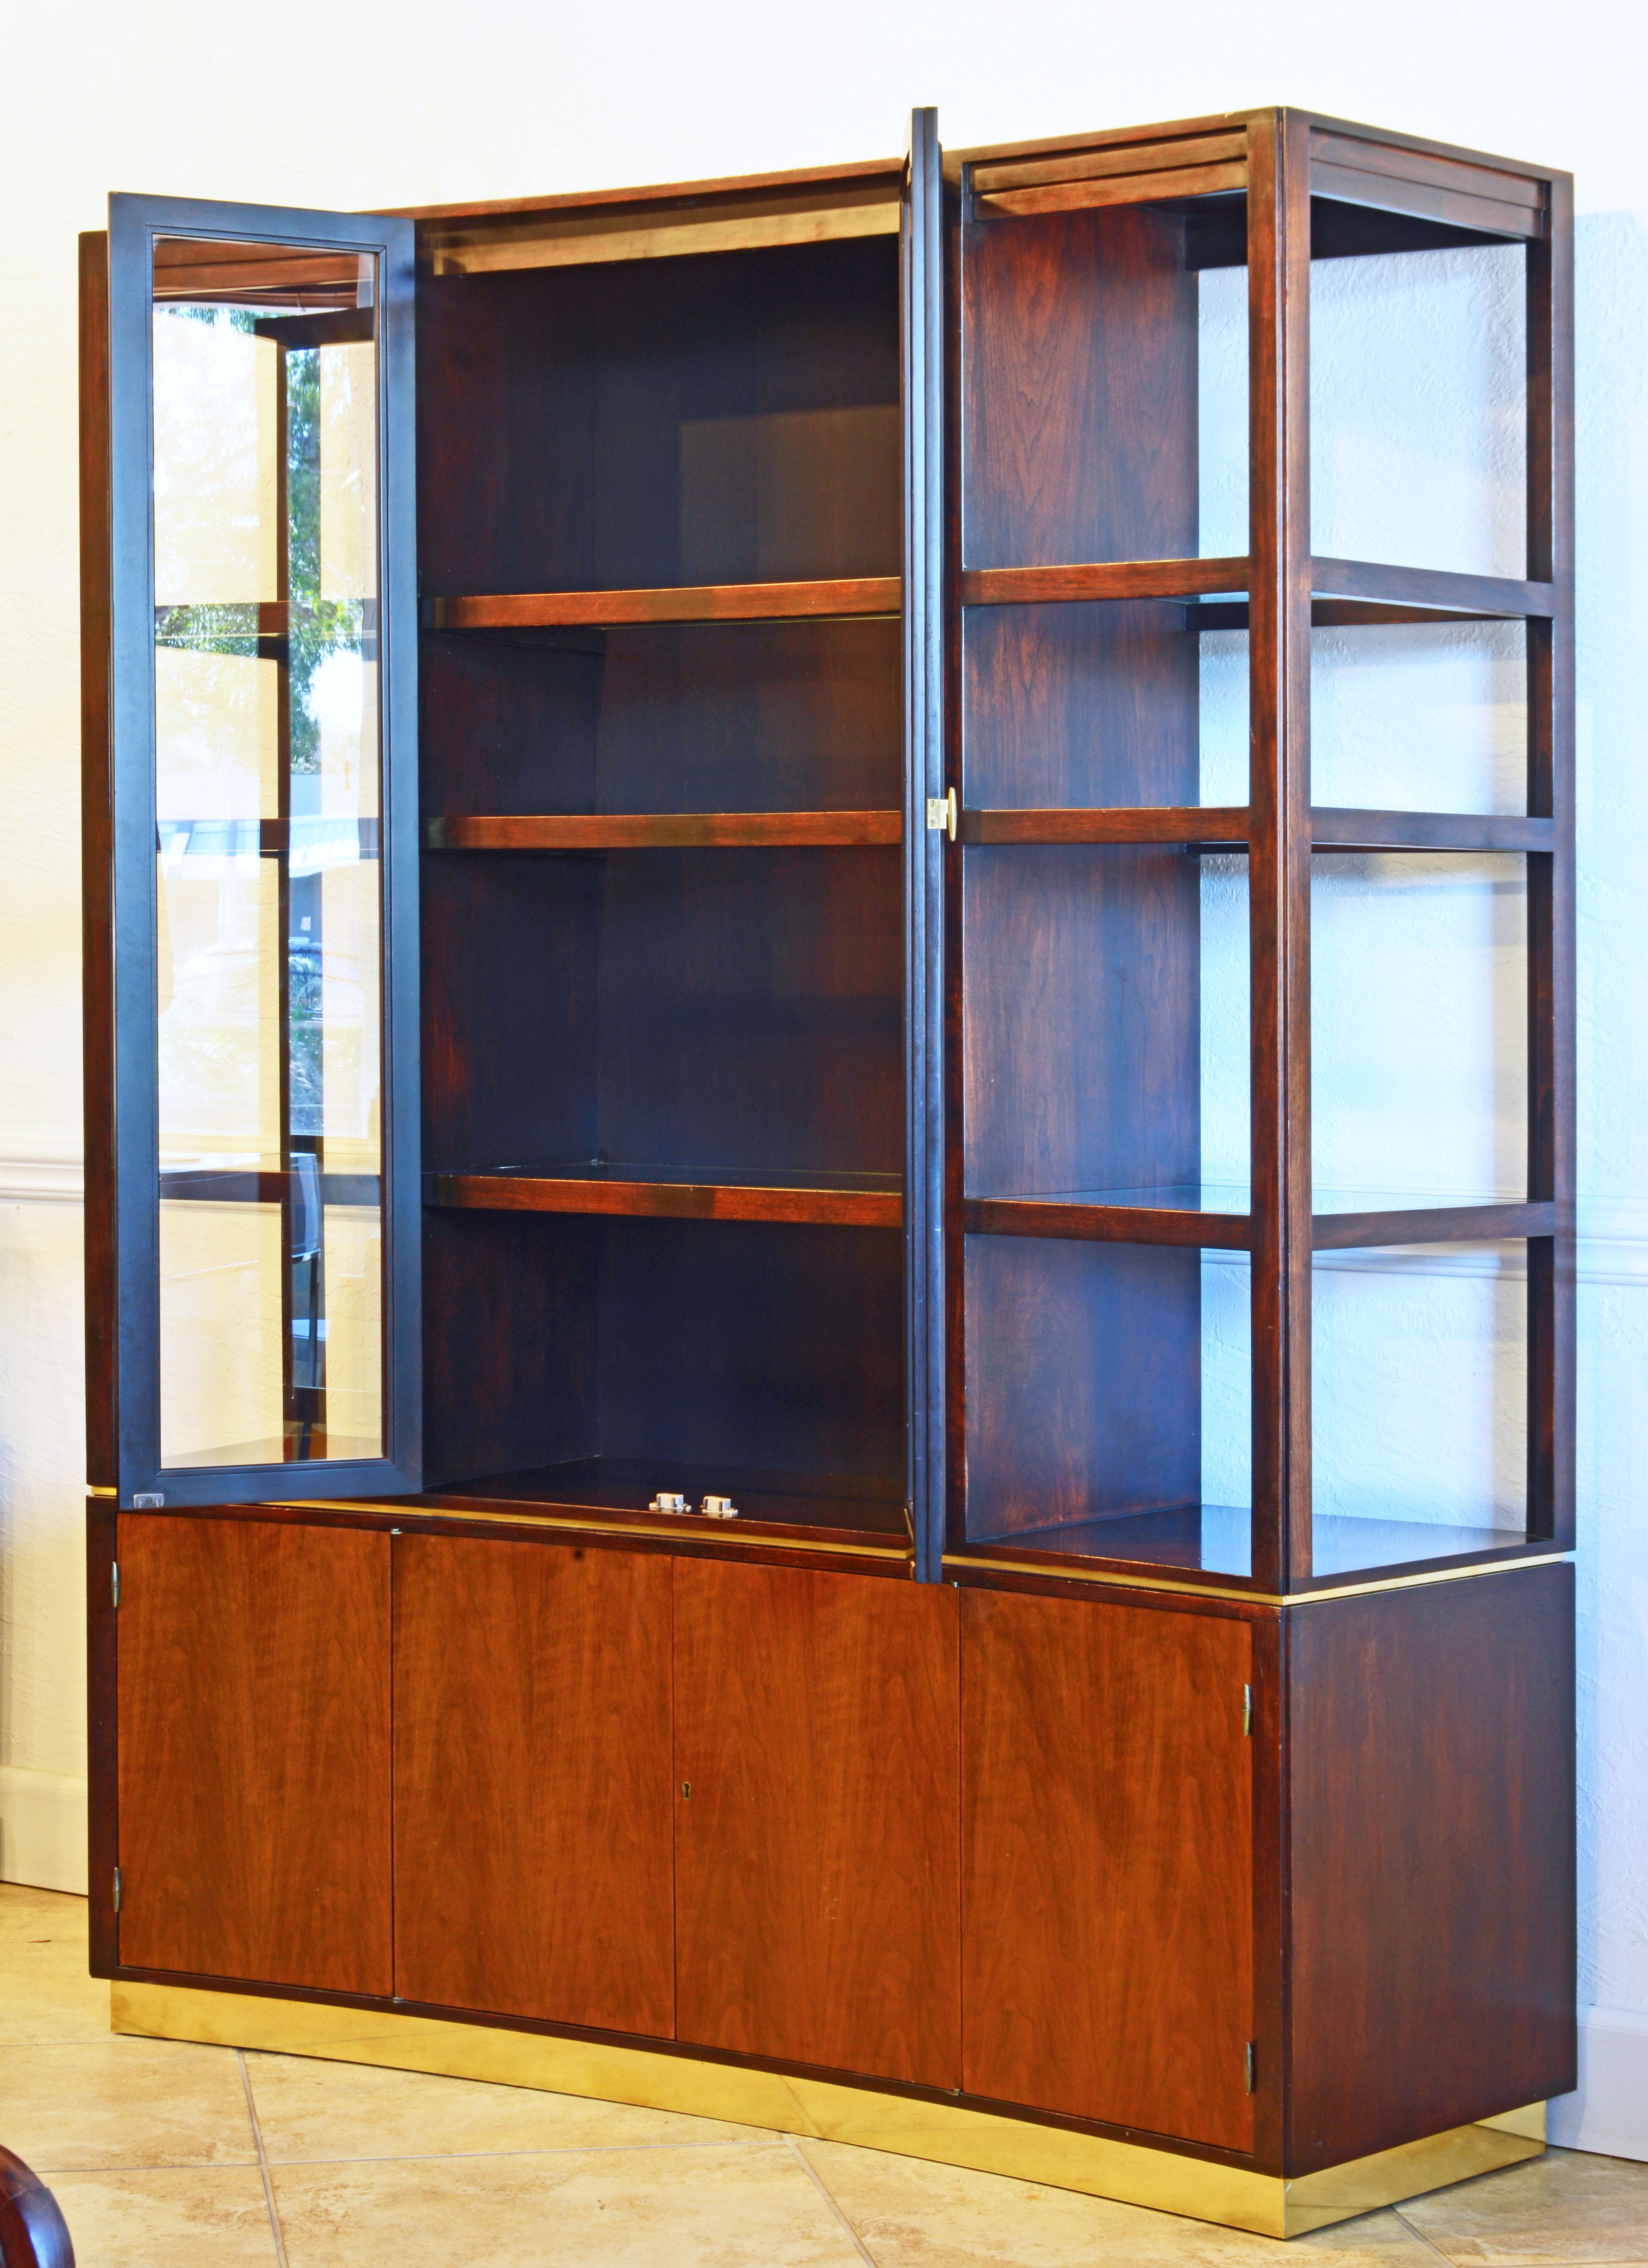 This superior design by Edward Wormley combines the sideboard or credenza with open and closed glass shelving in a curve front wall unit often called the Superstructure. It is made of walnut in two tones, the cabinet doors being the lighter one. The